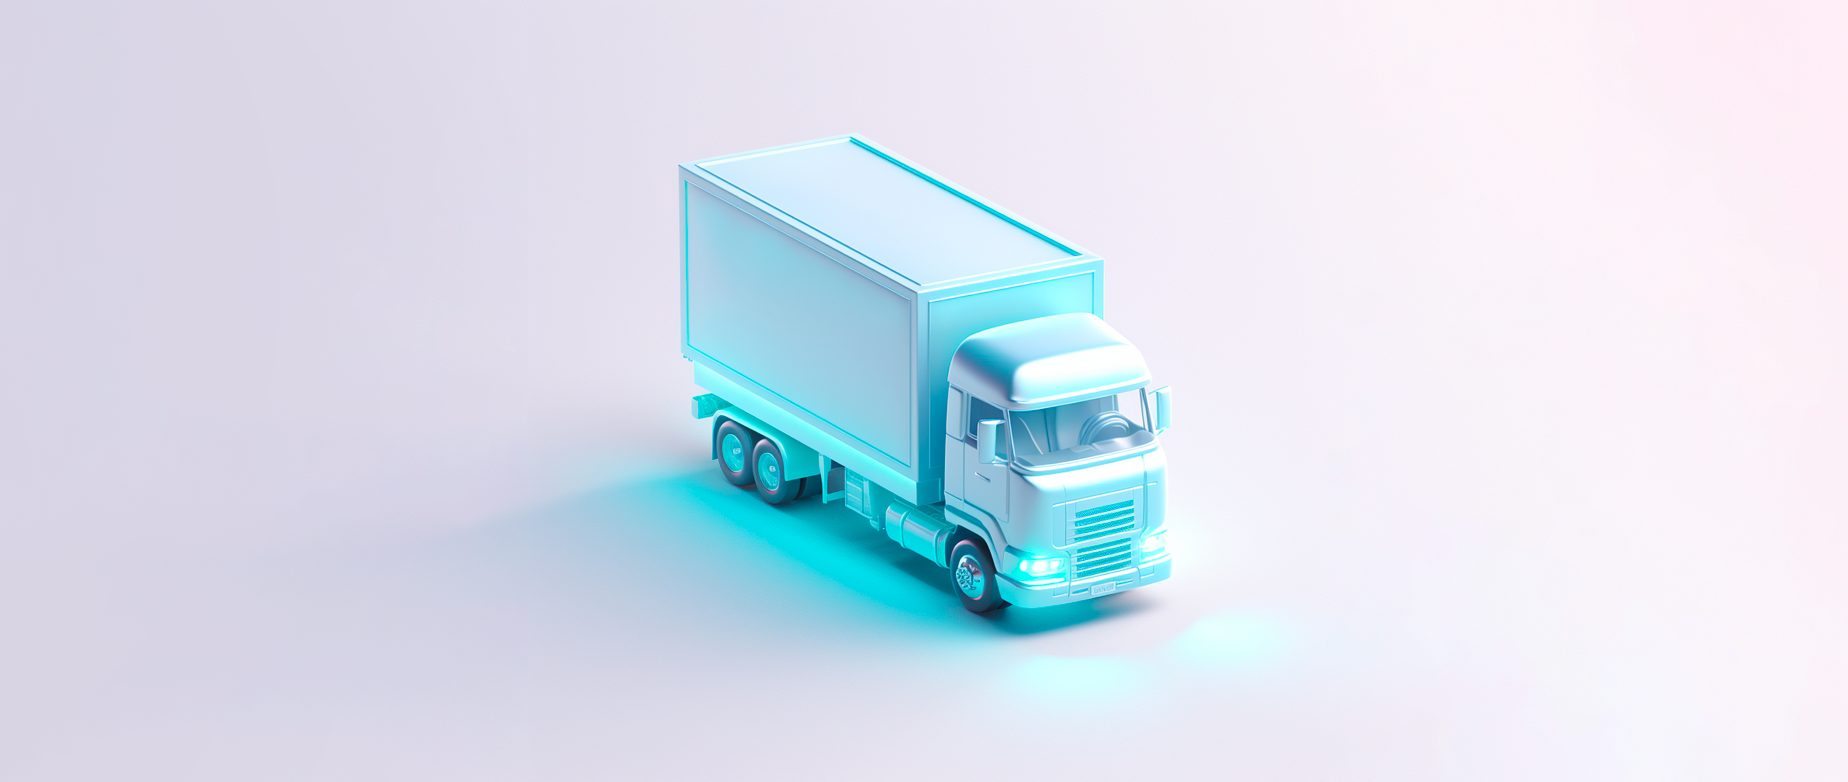 A toy semi-truck with glowing lights represents the concept of order fulfillment.